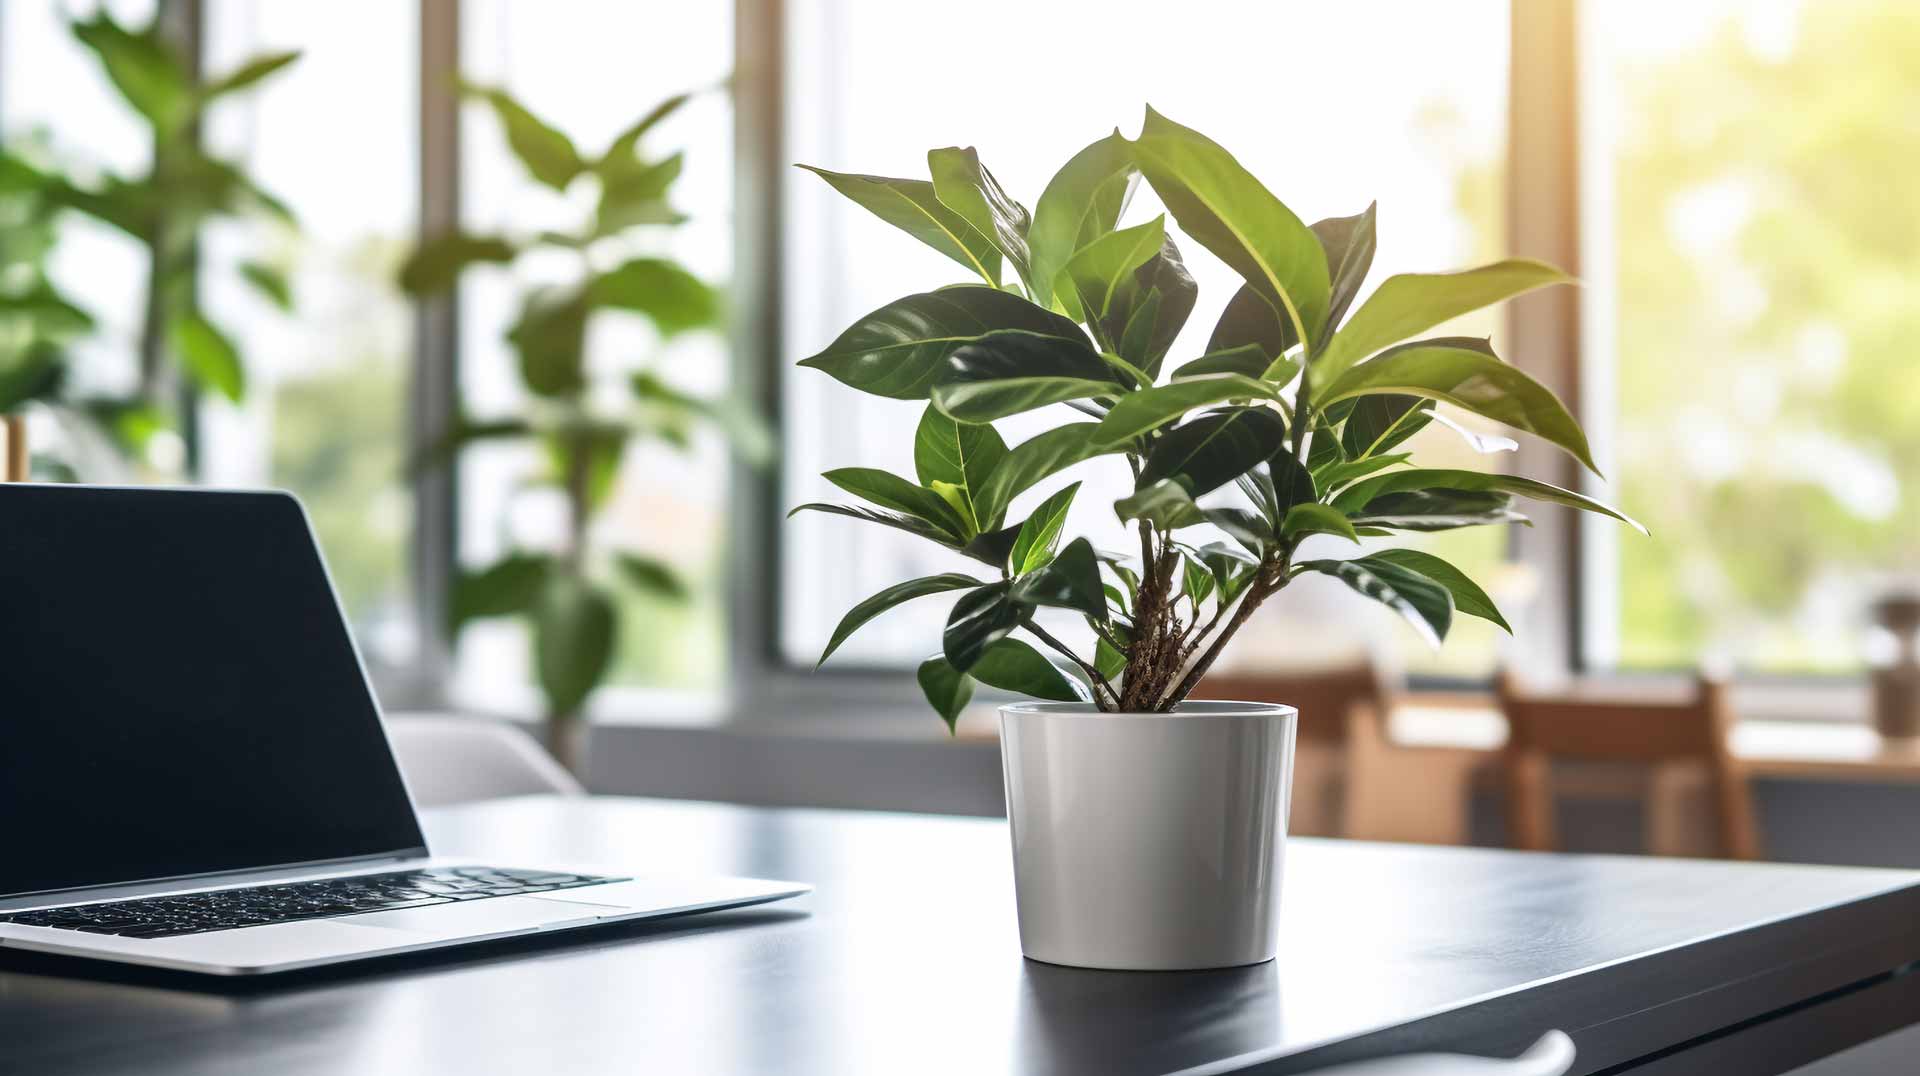 Plant and laptop on desk in bright, clean office space